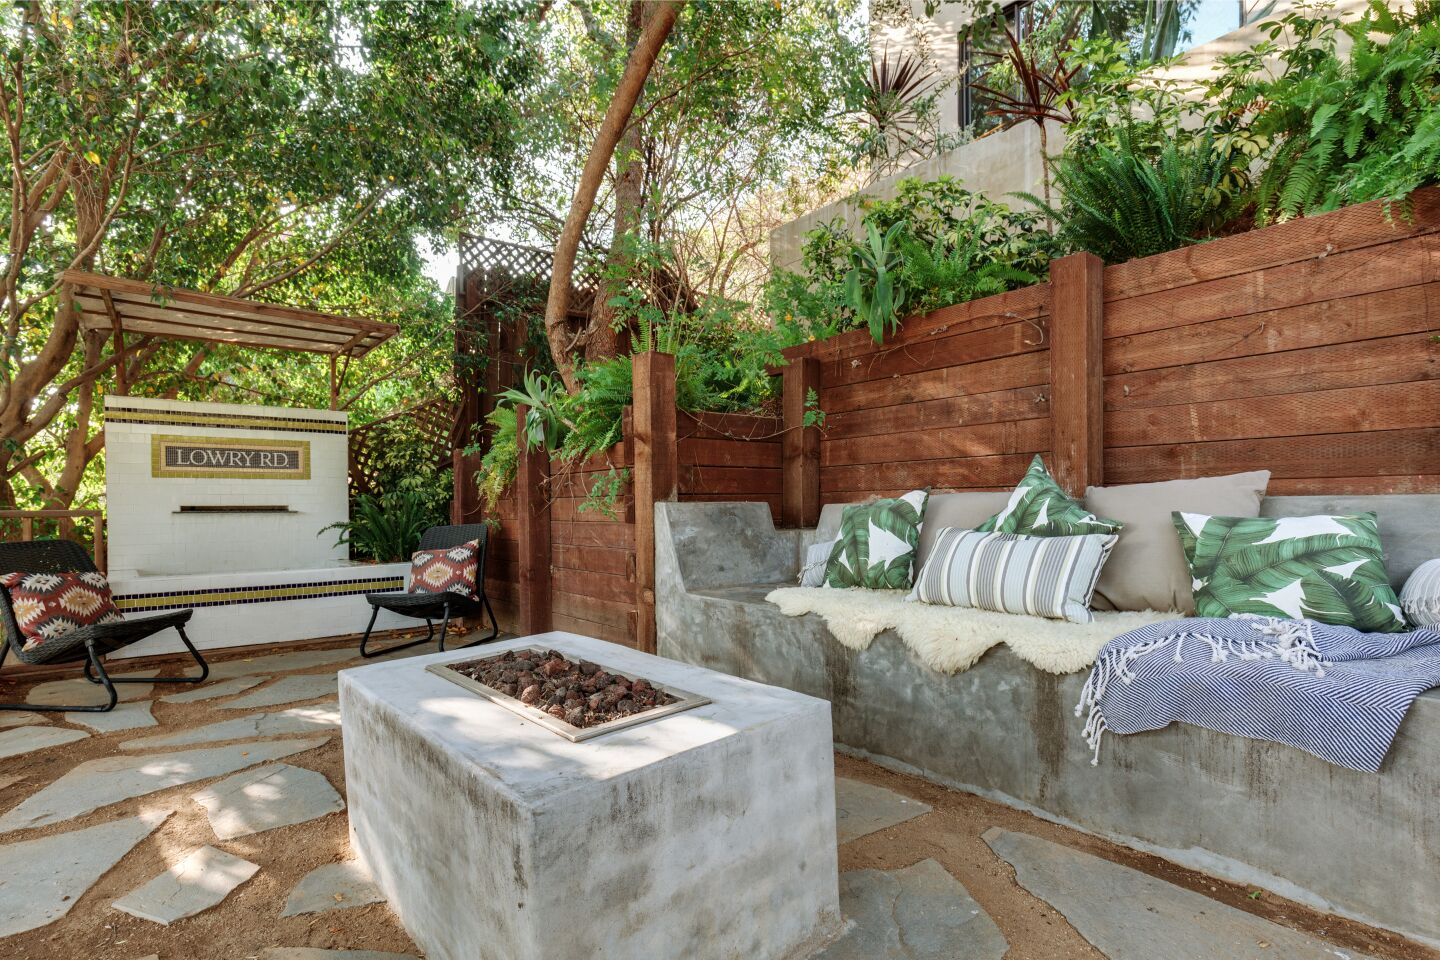 The fire pit with a sitting area nearby and greenery behind a retaining wall.